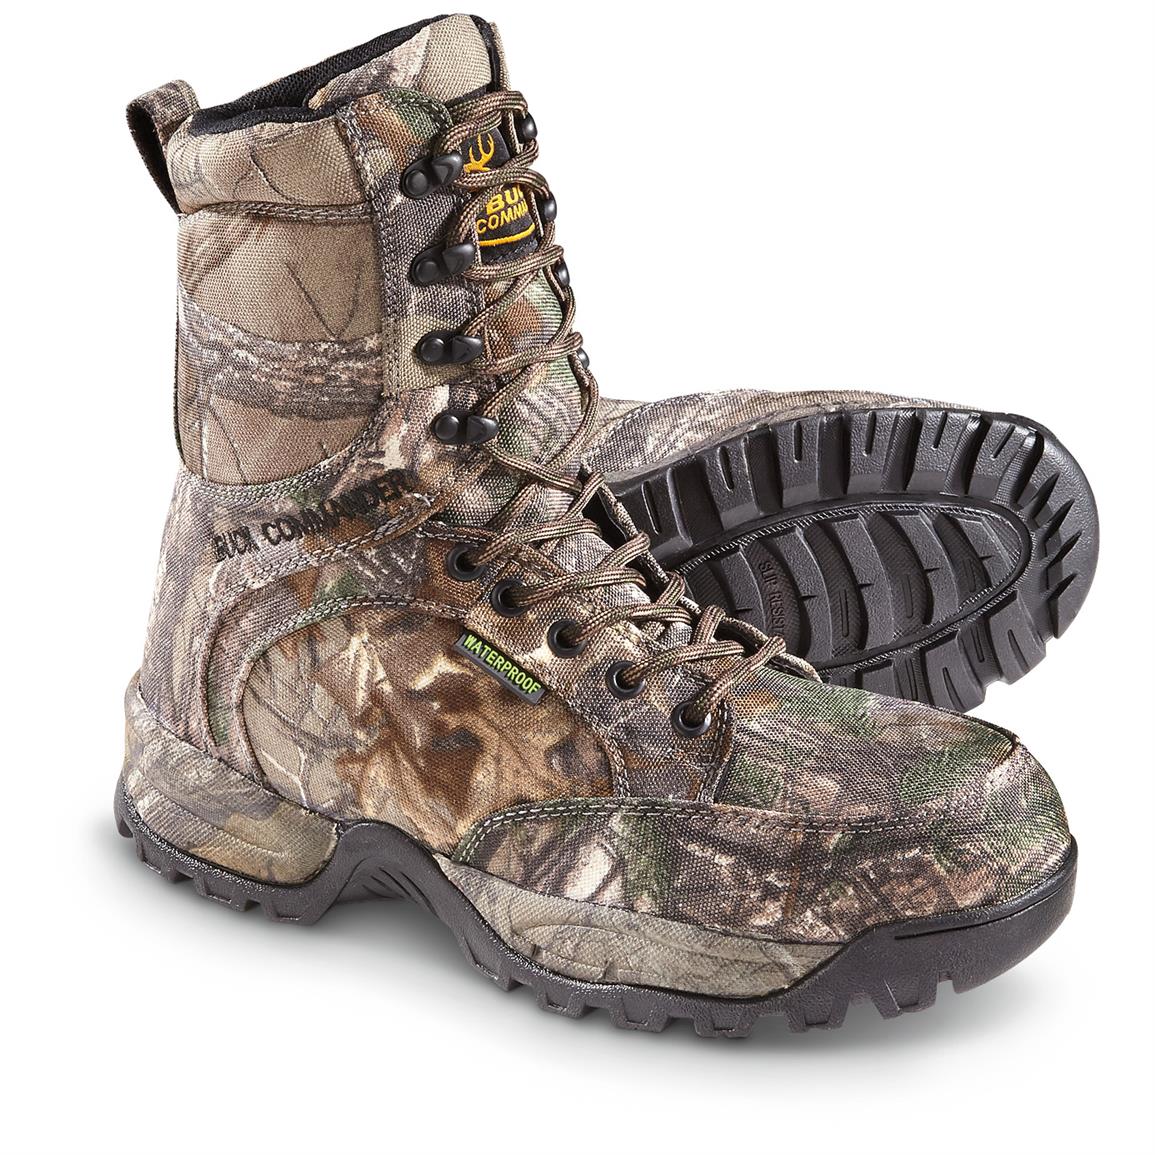 200 gram insulated boots,Save up to 18%,www.ilcascinone.com